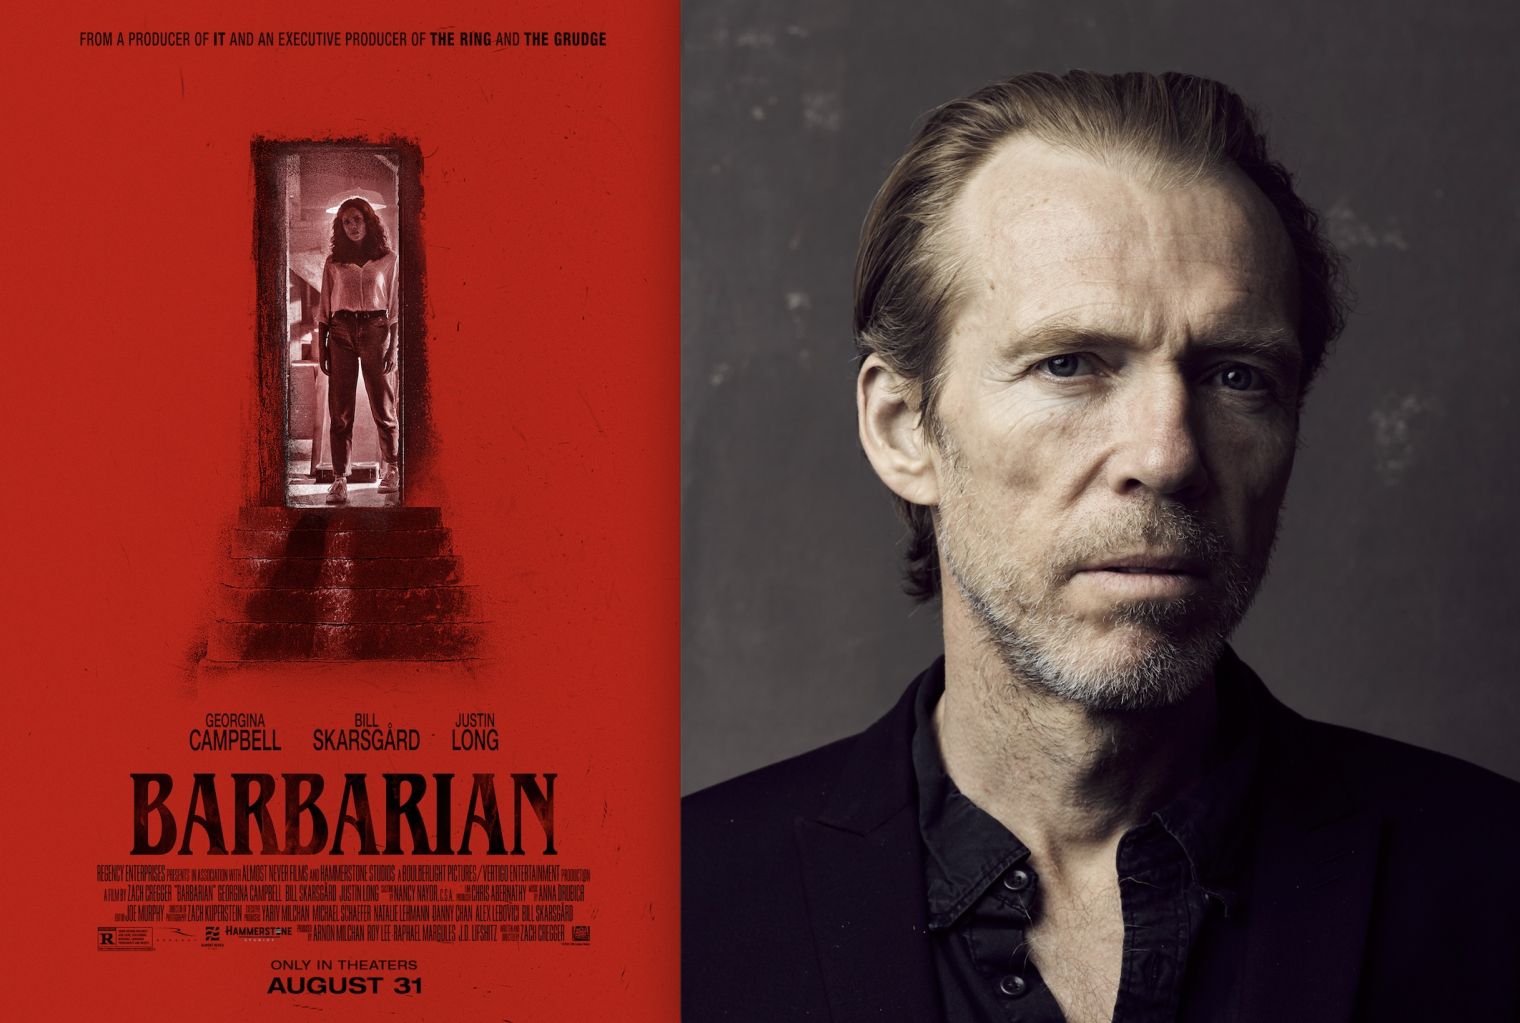 Richard Brake stars in new horror flick 'Barbarian' which topped the US cinema box office ratings at the weekend